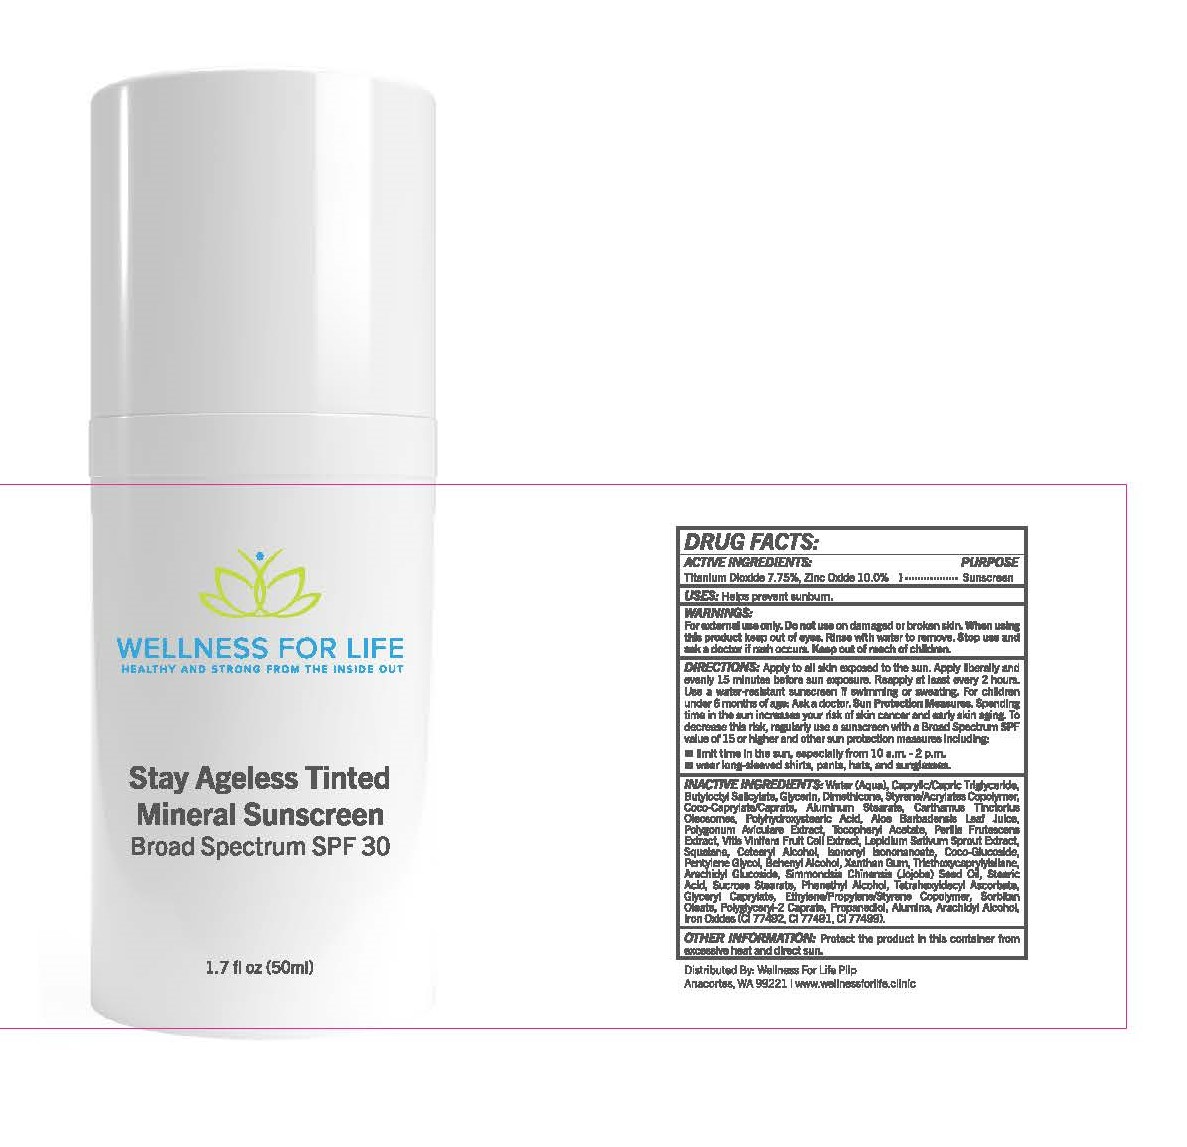 Stay Ageless Tinted Mineral Sunscreen Broad Spectrum SPF 30 1.75 fl oz (50ml)